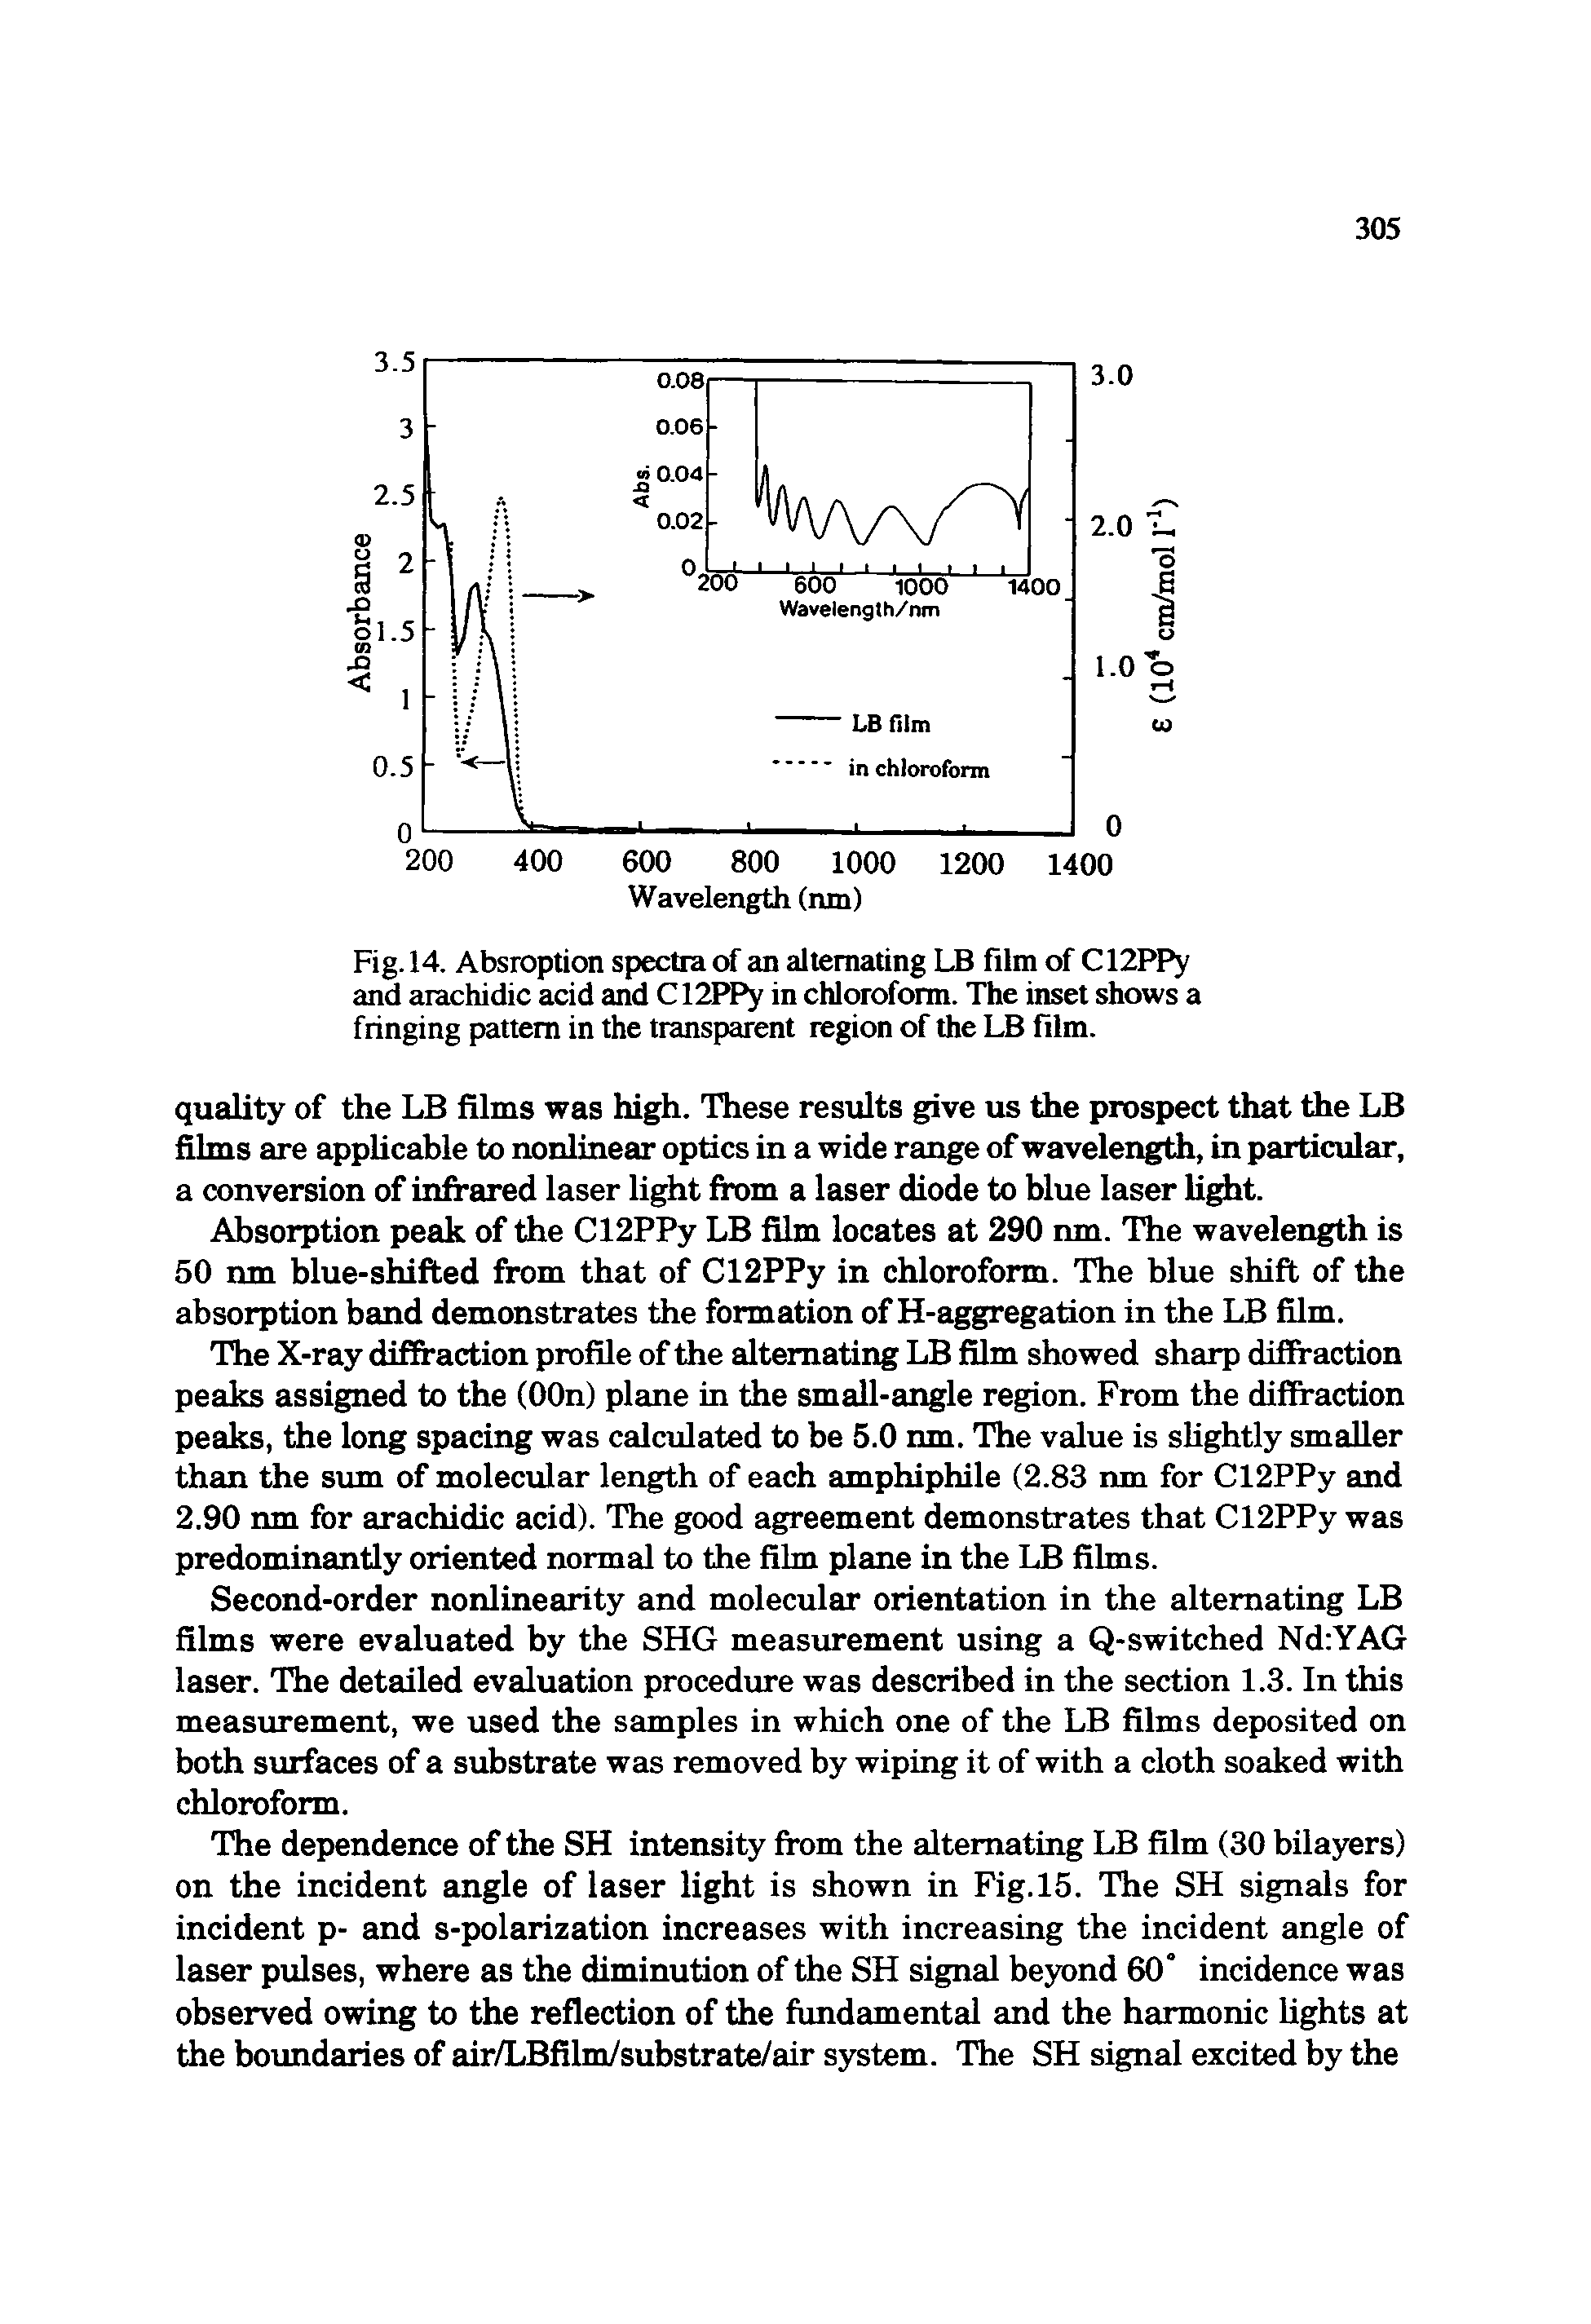 Fig. 14. Absroption spectra of an alternating LB film of C12PPy and arachidic acid and C12PPy in chloroform. The inset shows a fringing pattern in the transparent region of the LB film.